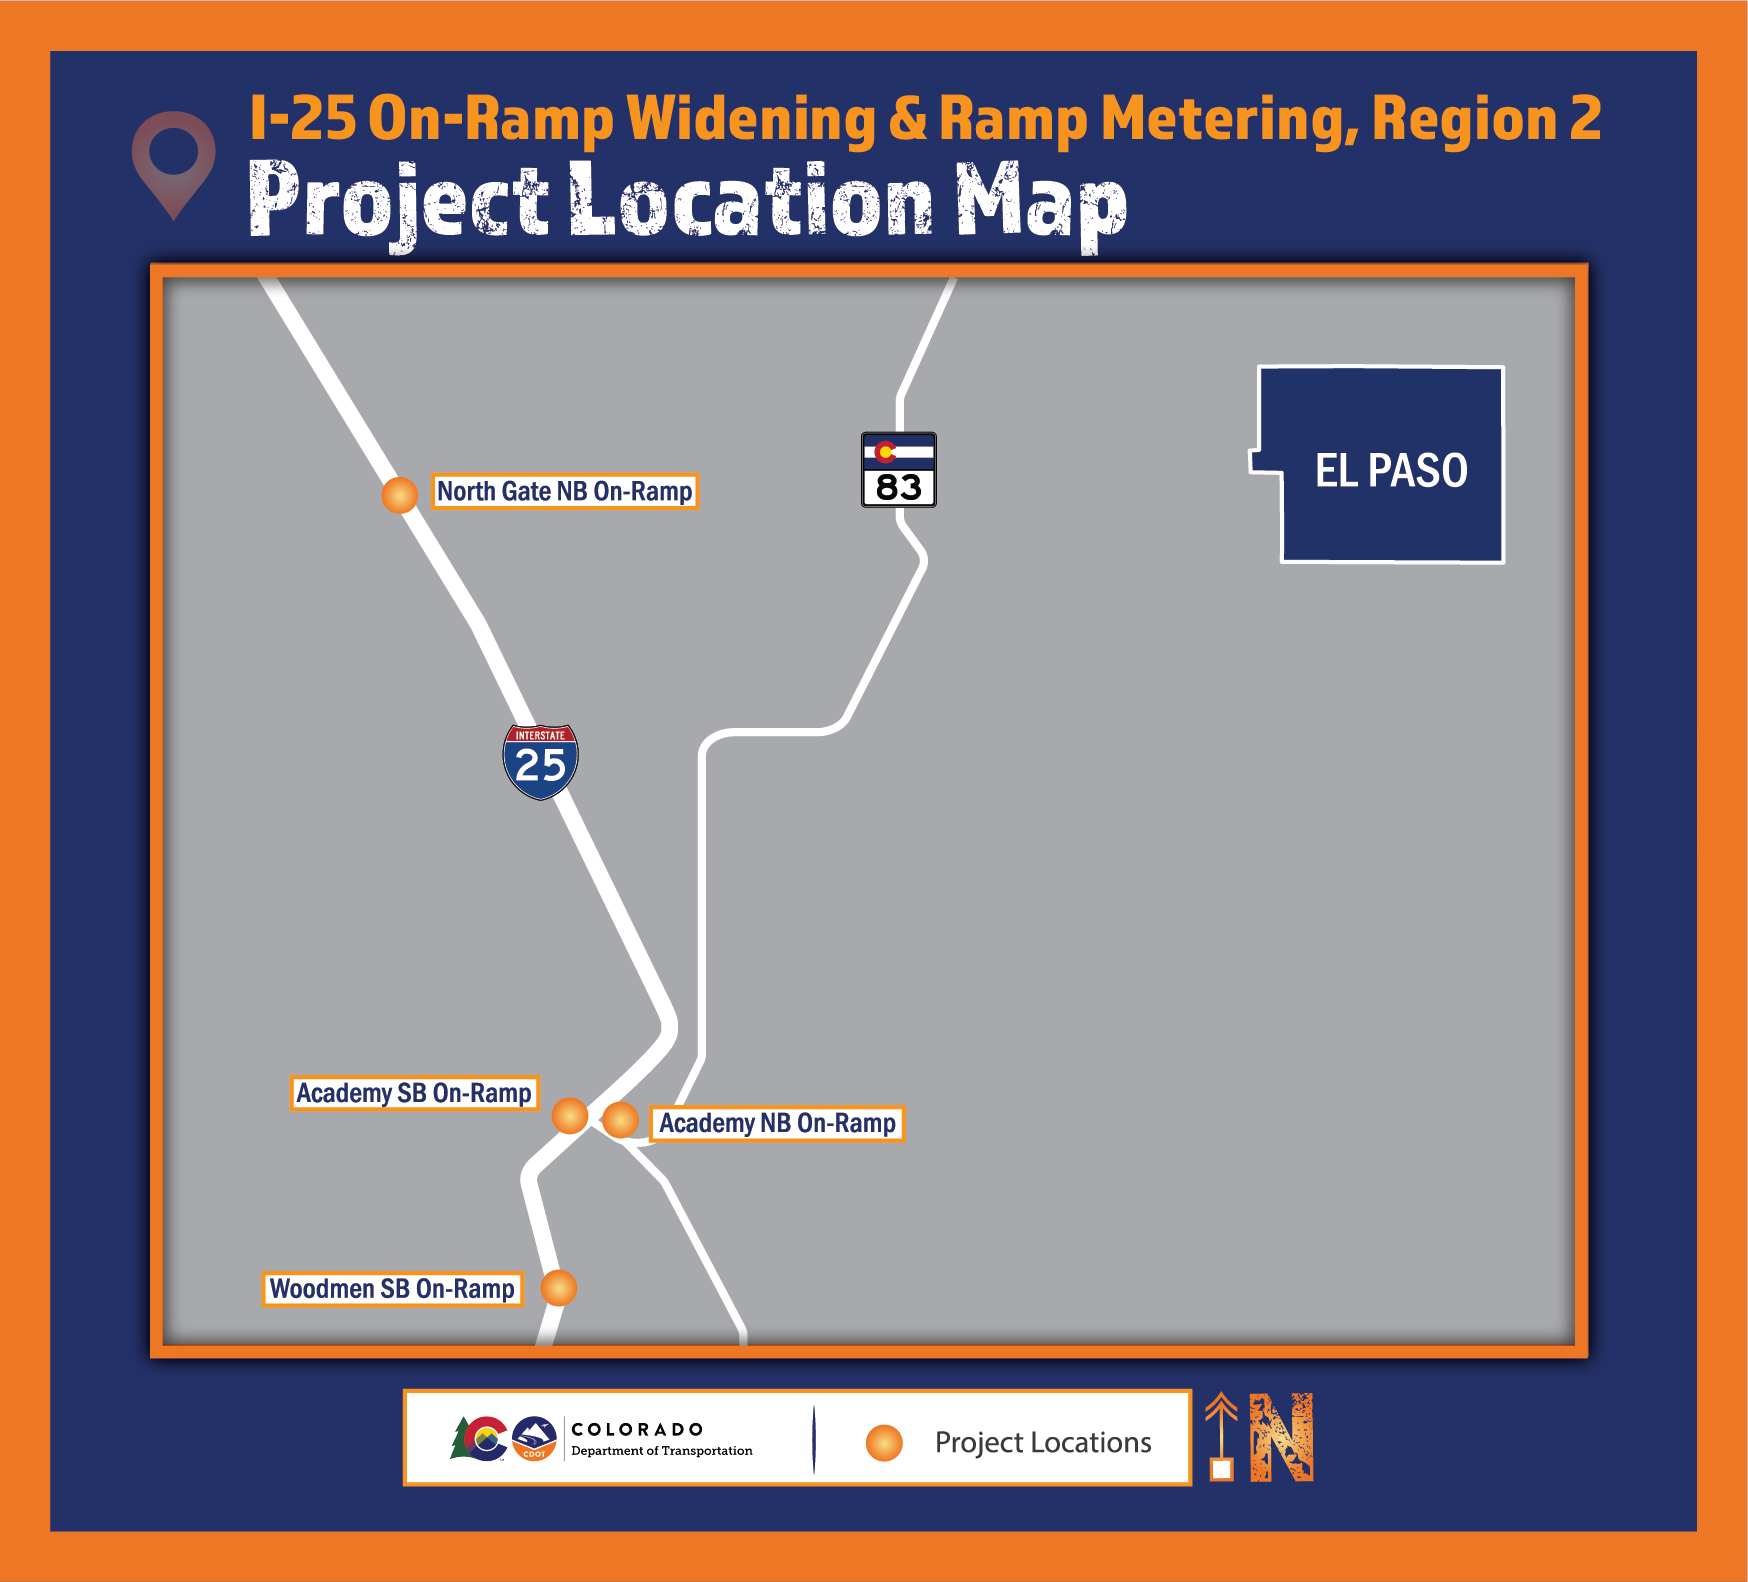 I-25 On-Ramp Widening and Ramp Metering R2 Project Location Map v1 1.7.2021-01 (2).png detail image